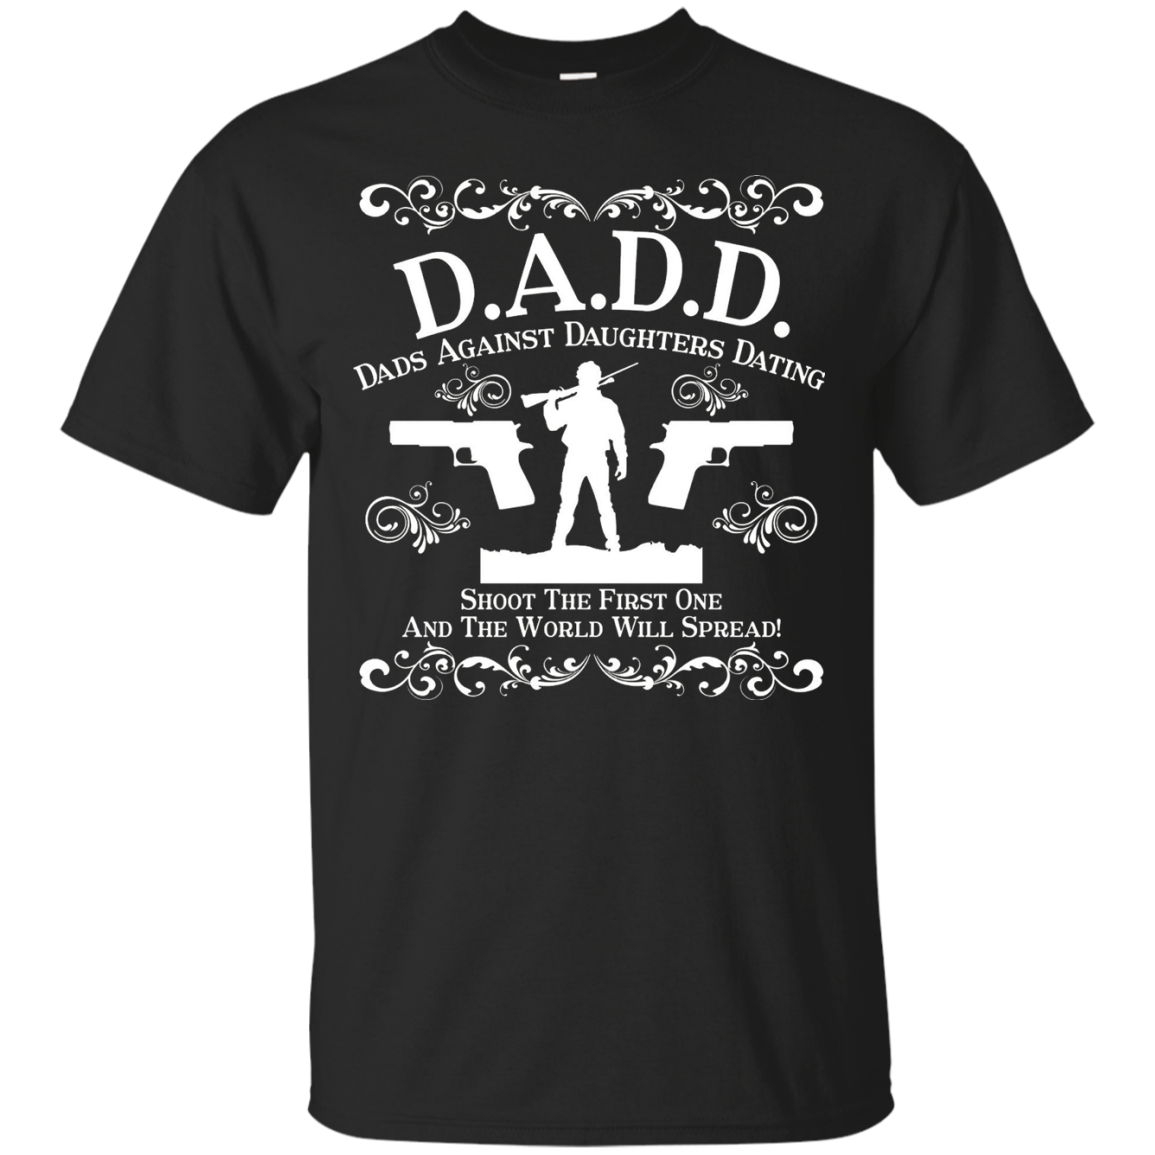 Dad T Shirt Dadd Dads Against Daughters Dating Shoot Th Shirt Design Online 3700